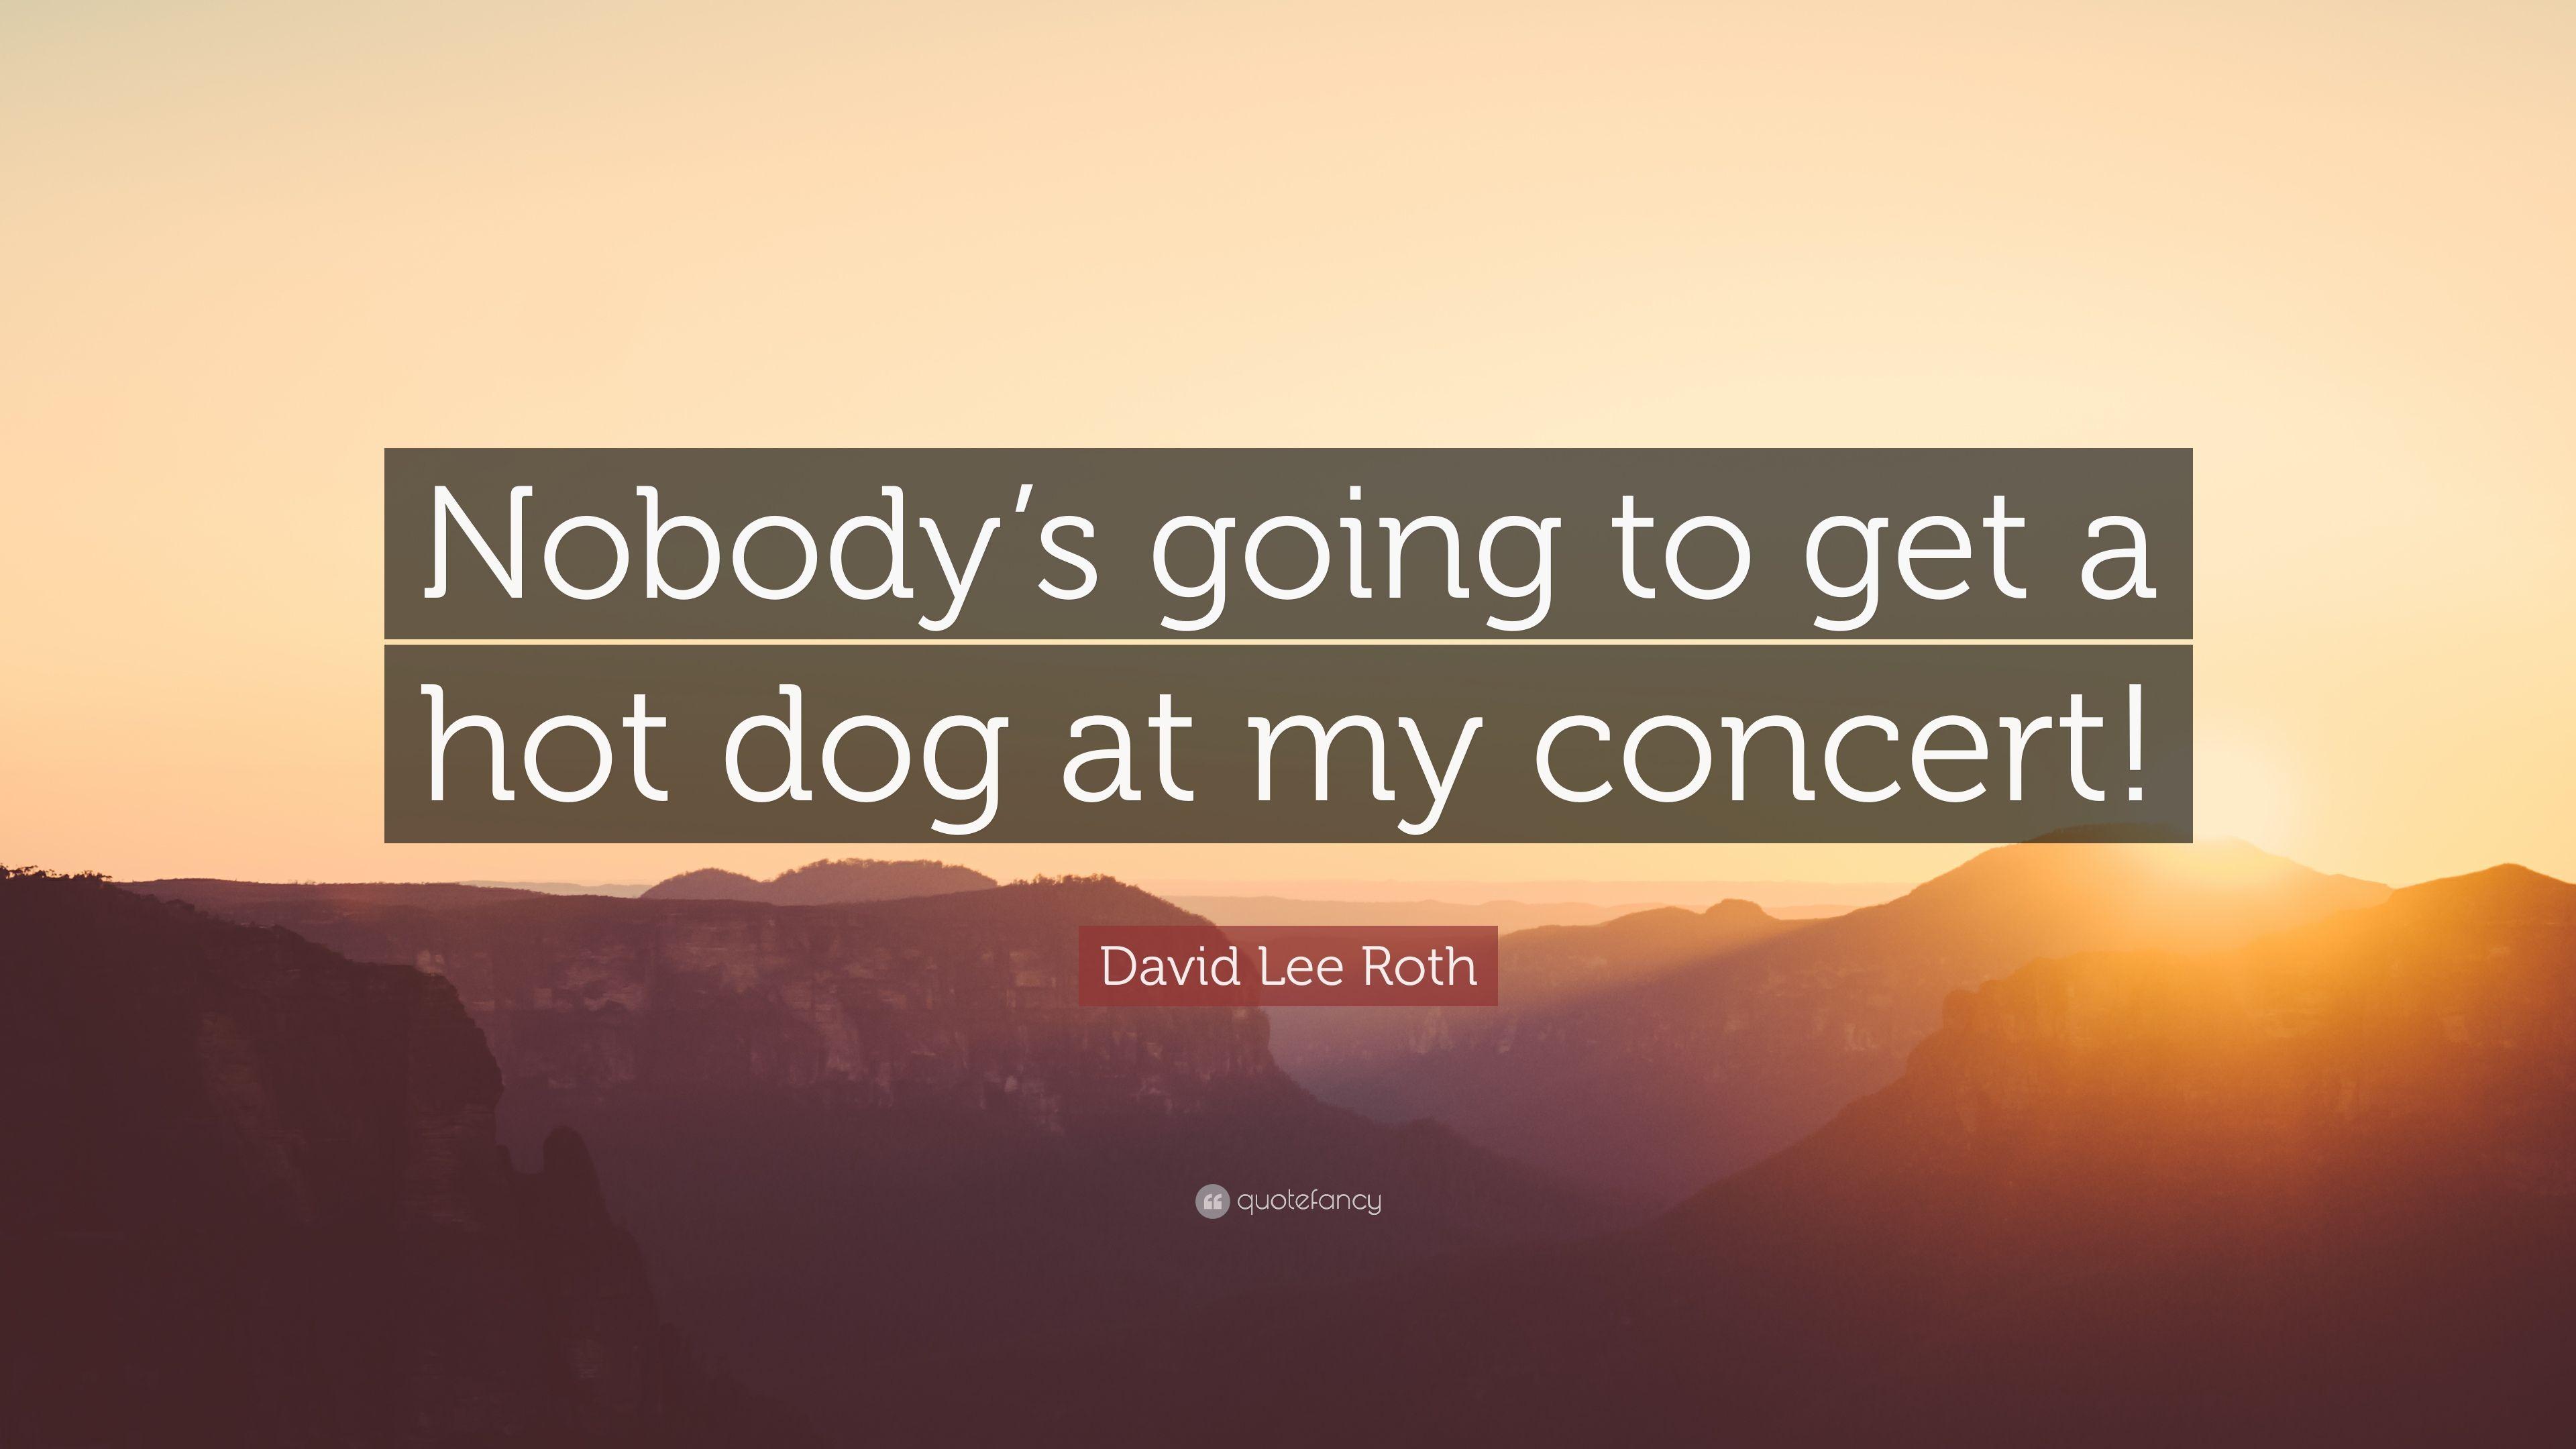 David Lee Roth Quote: “Nobody's going to get a hot dog at my concert